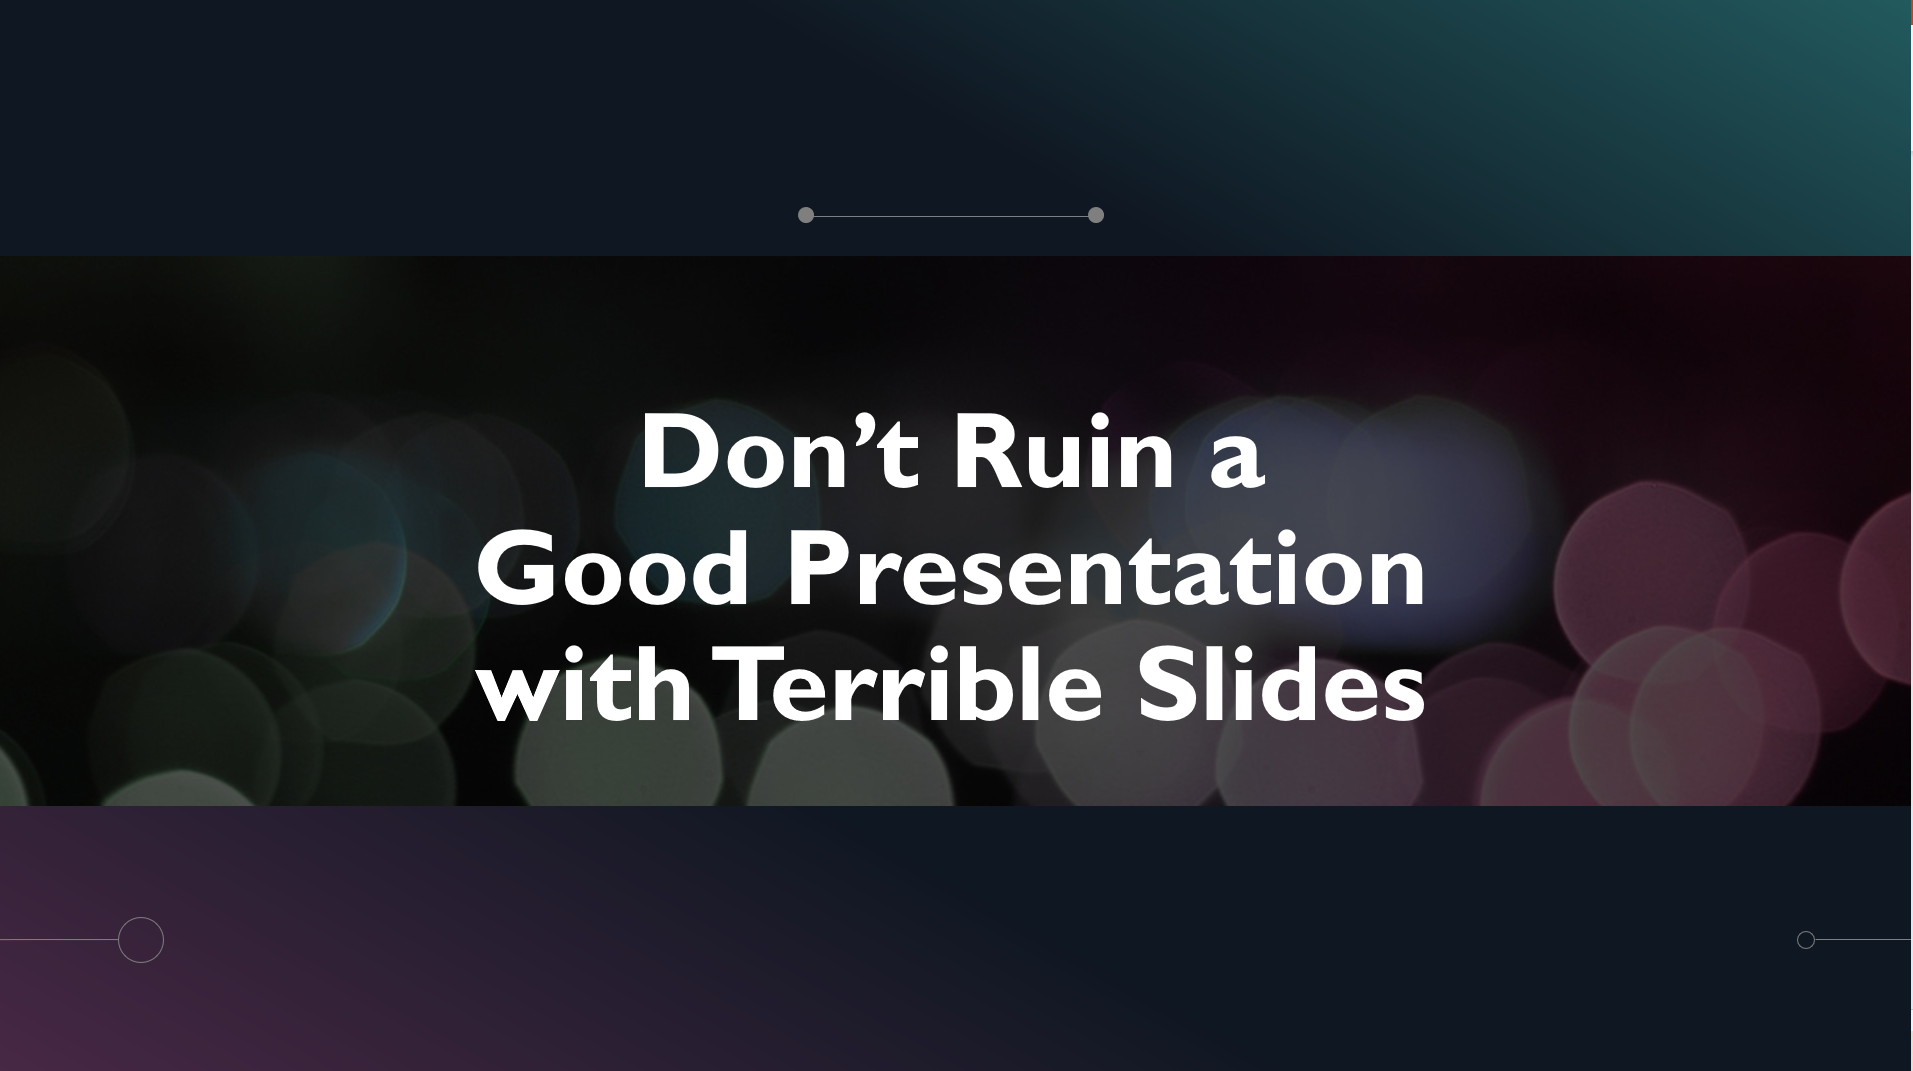 Don't ruin a good presentation with terrible slides